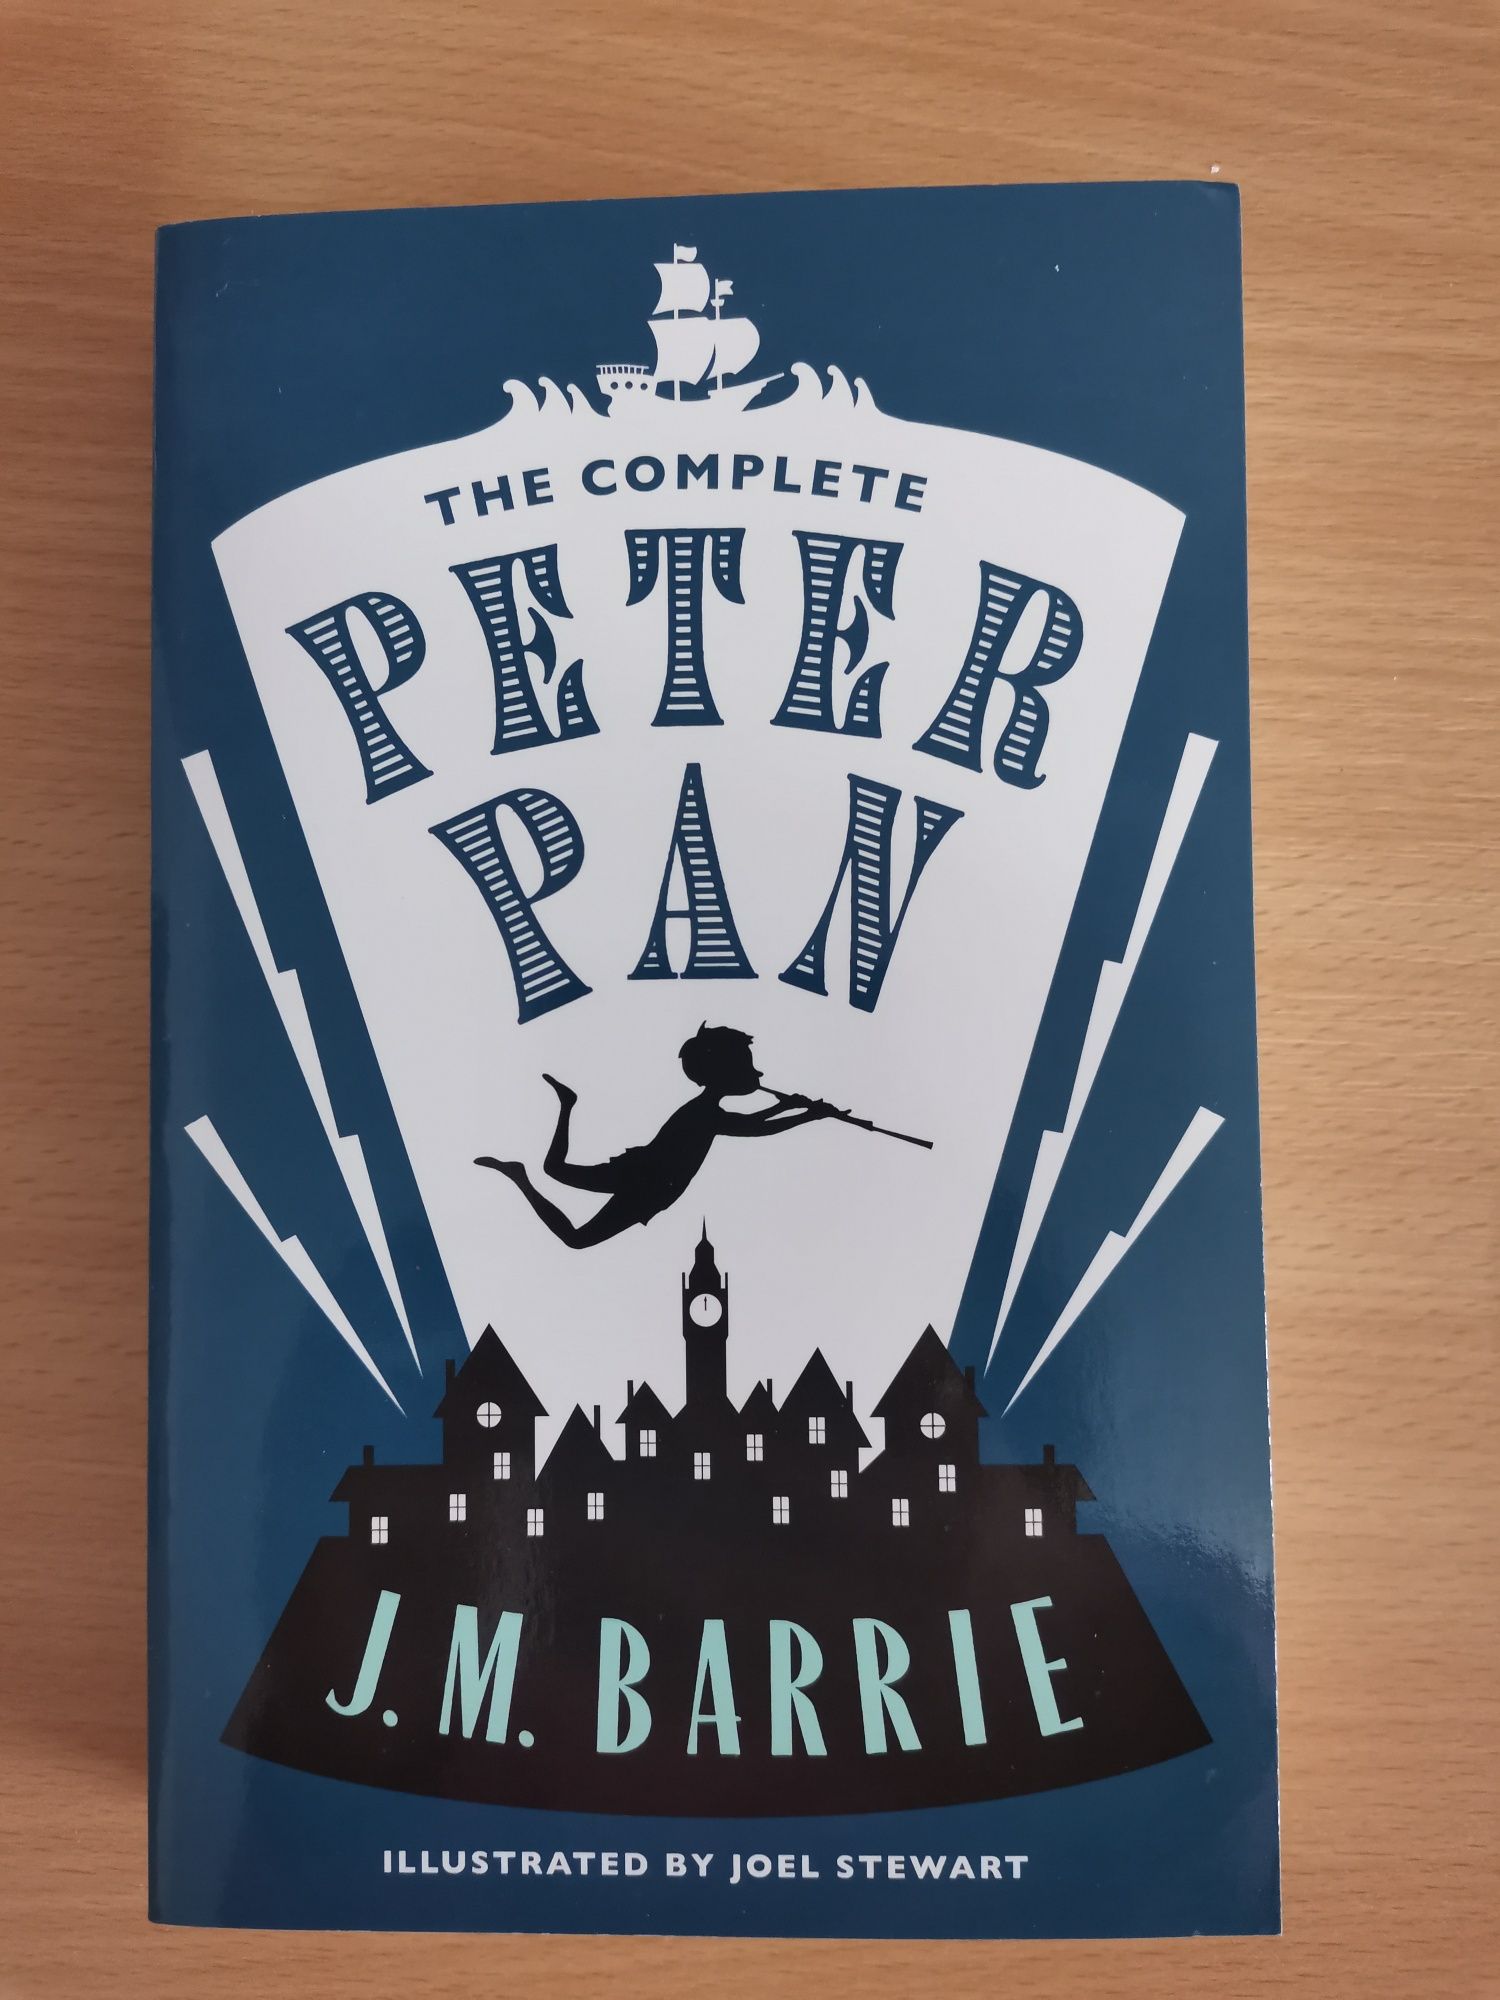 The complete peter pan